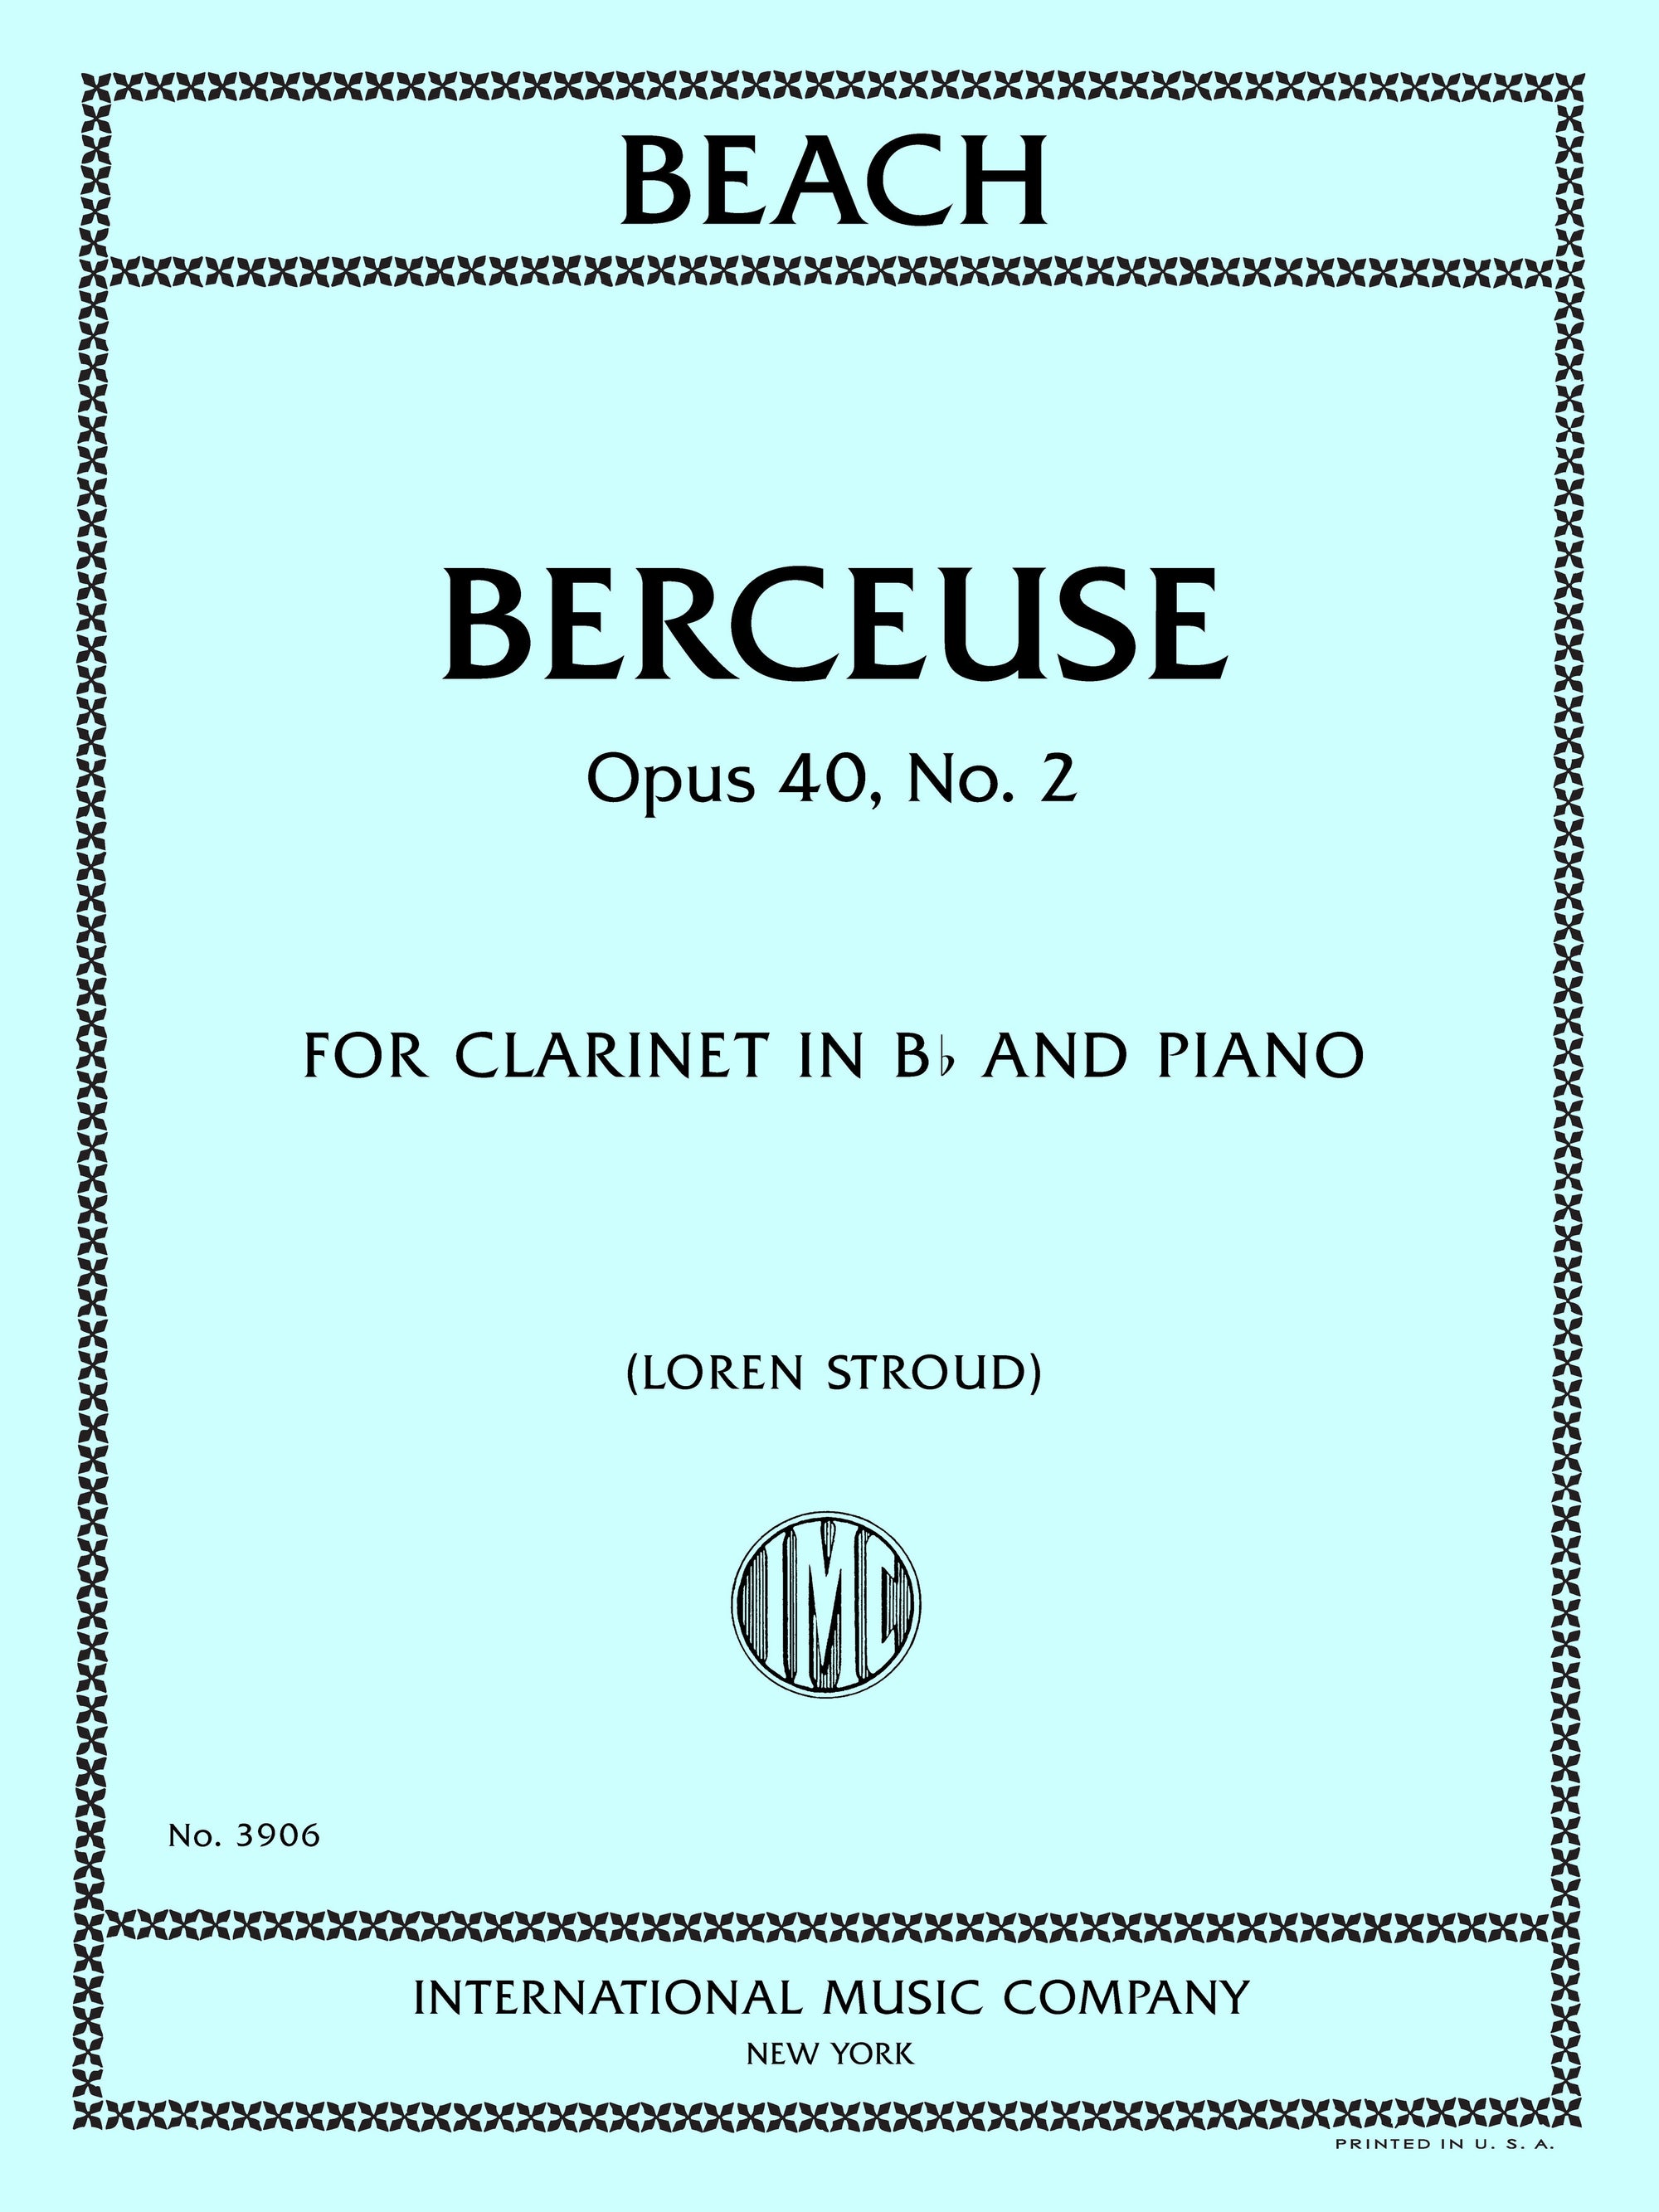 Beach: Berceuse, Op. 40, No. 2 (arr. for clarinet & piano)